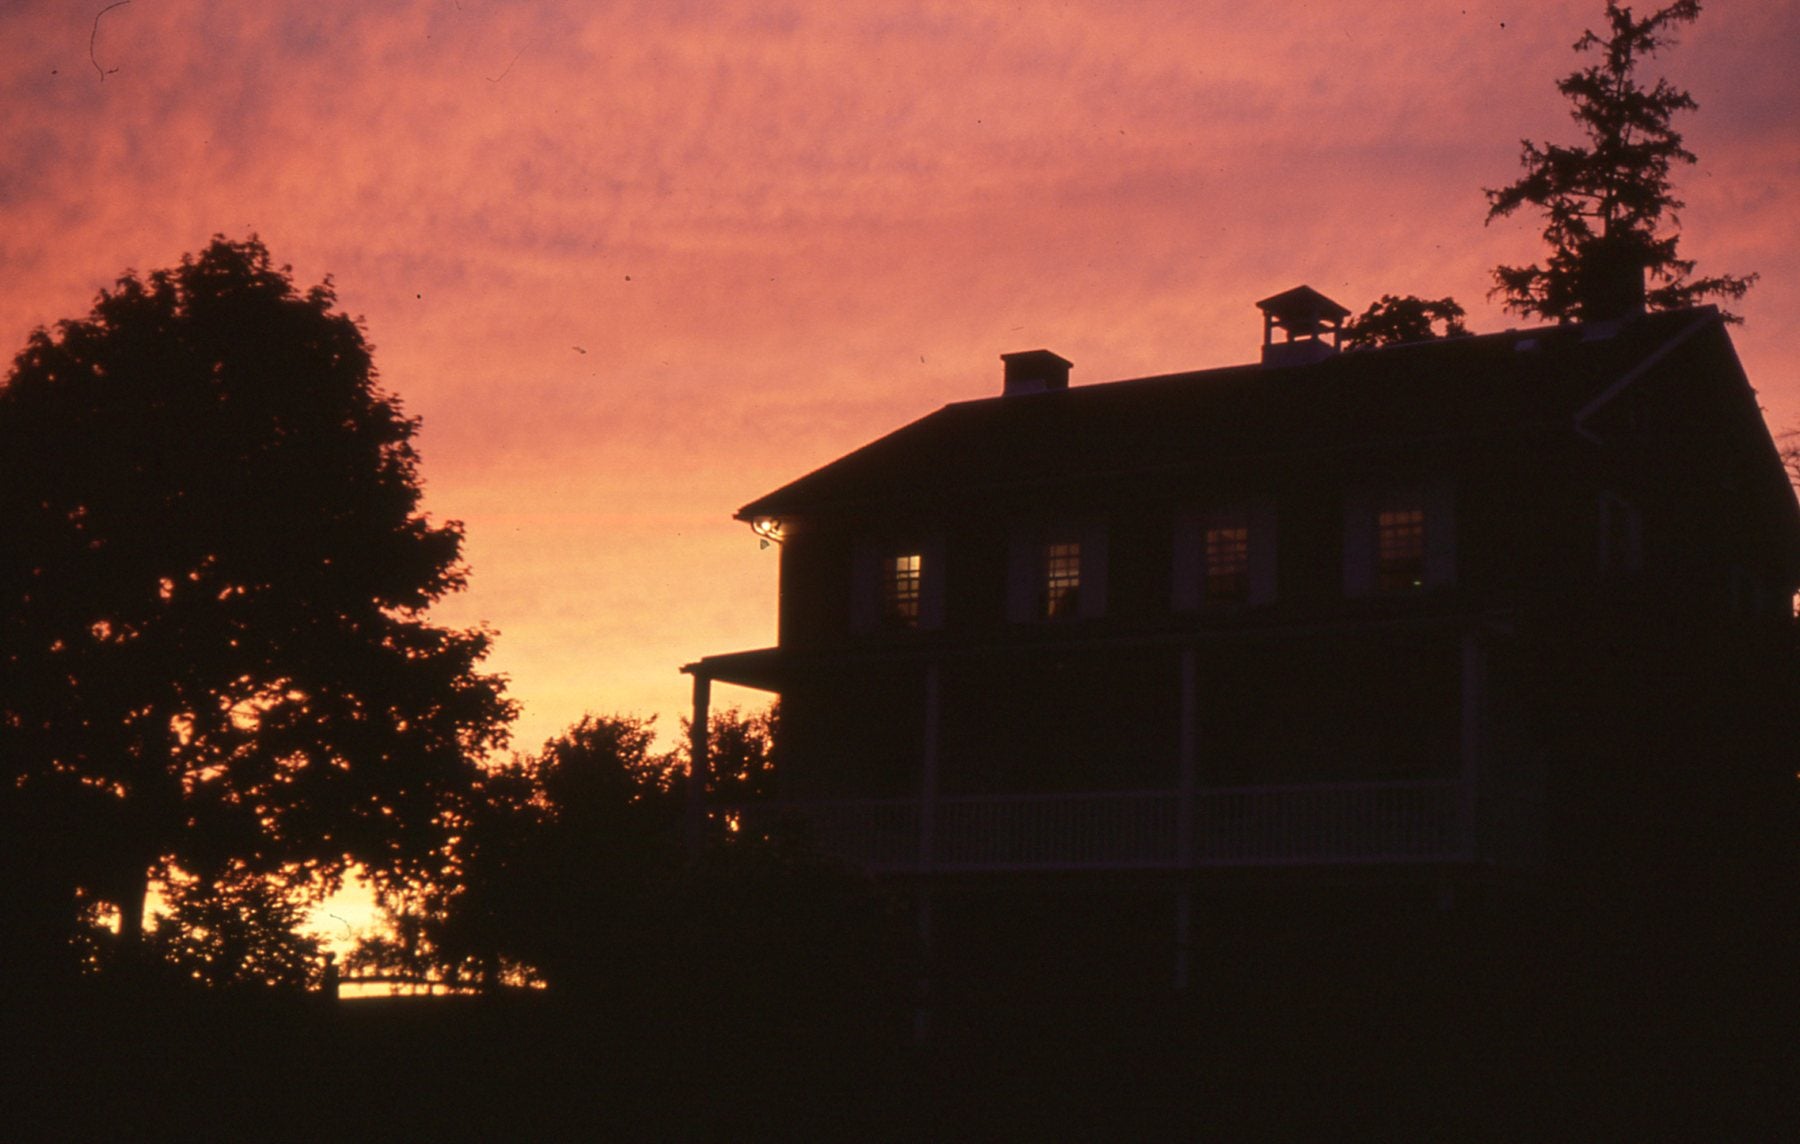 sunset in pinks and yellows, brubacher house in silhoette